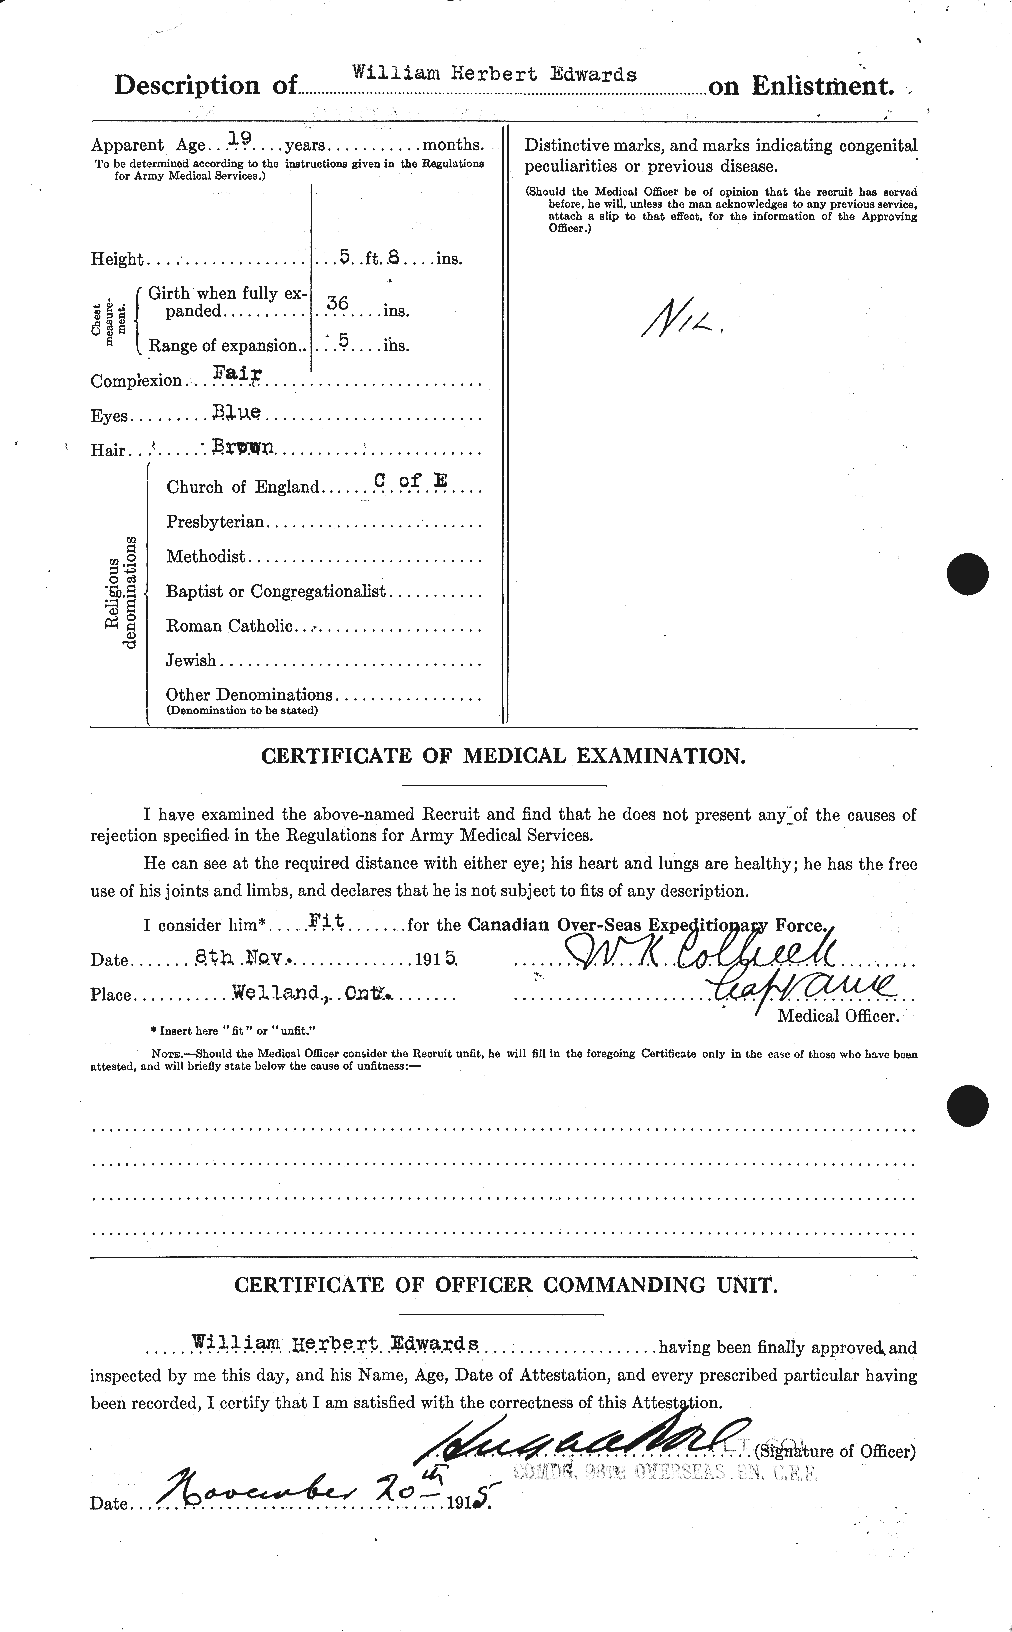 Personnel Records of the First World War - CEF 310436b